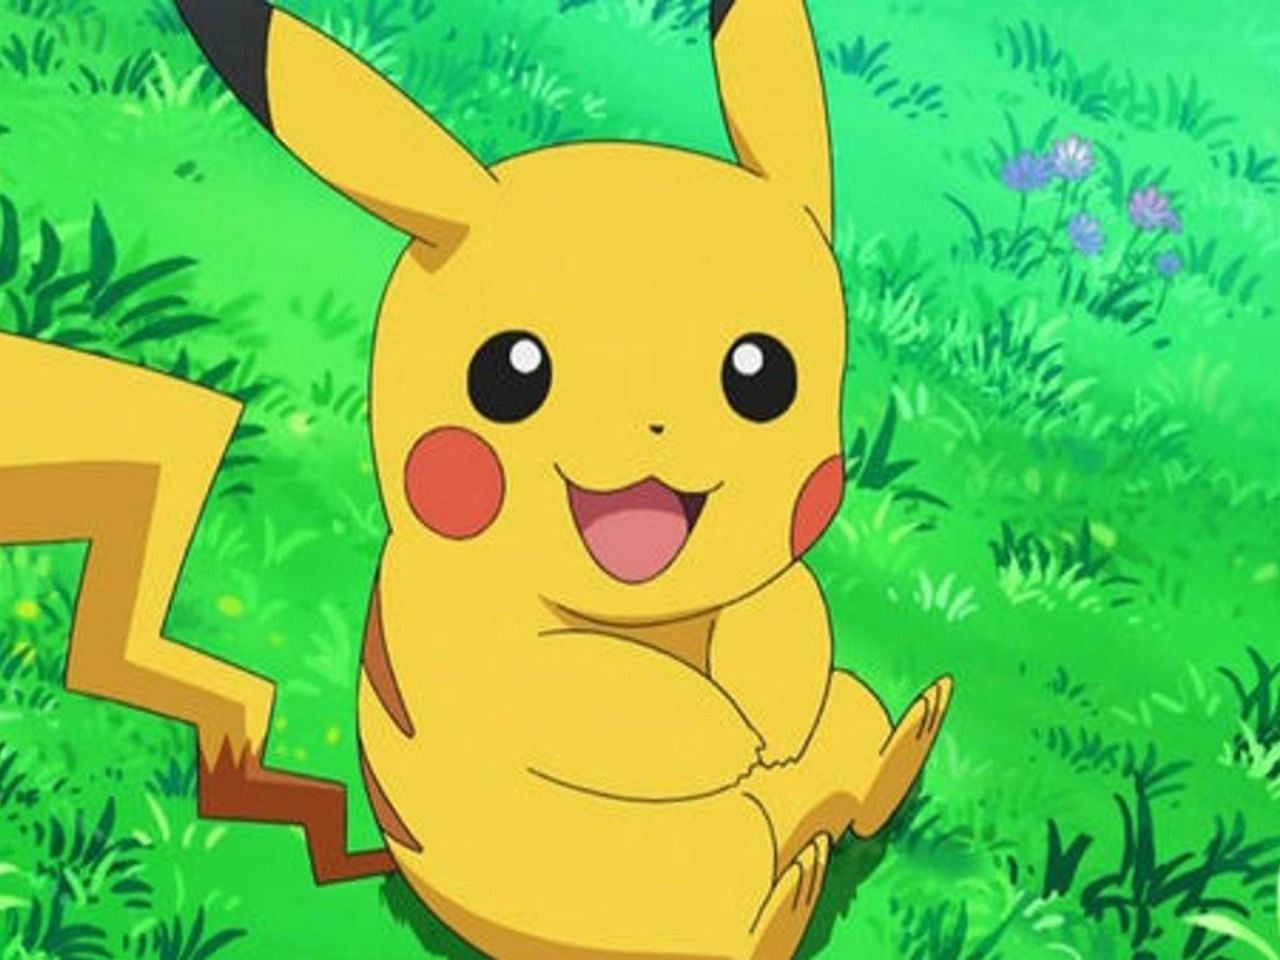 Pikachu as seen in the anime.  (Image via OLM Inc.)